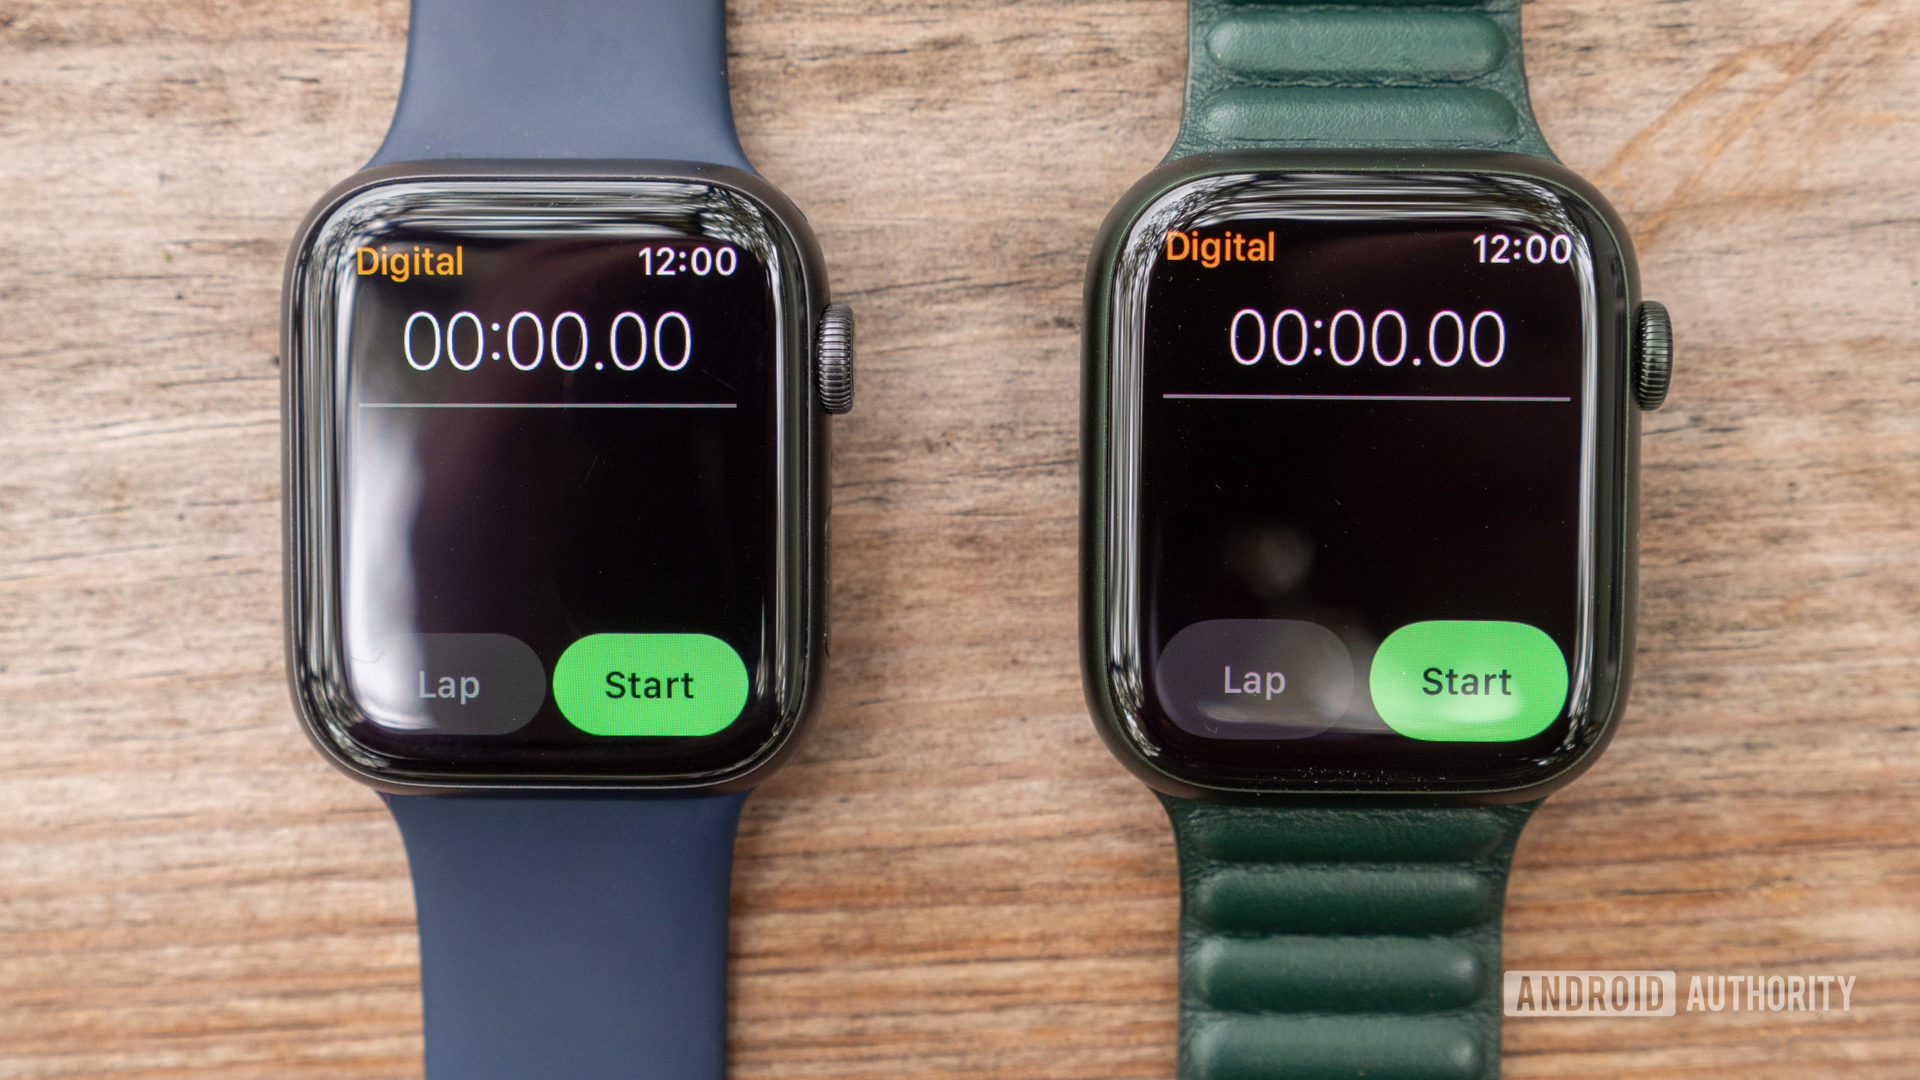 The Apple Watch Series 7 next to the Apple Watch Series 6 showing the display sizes in the stopwatch app